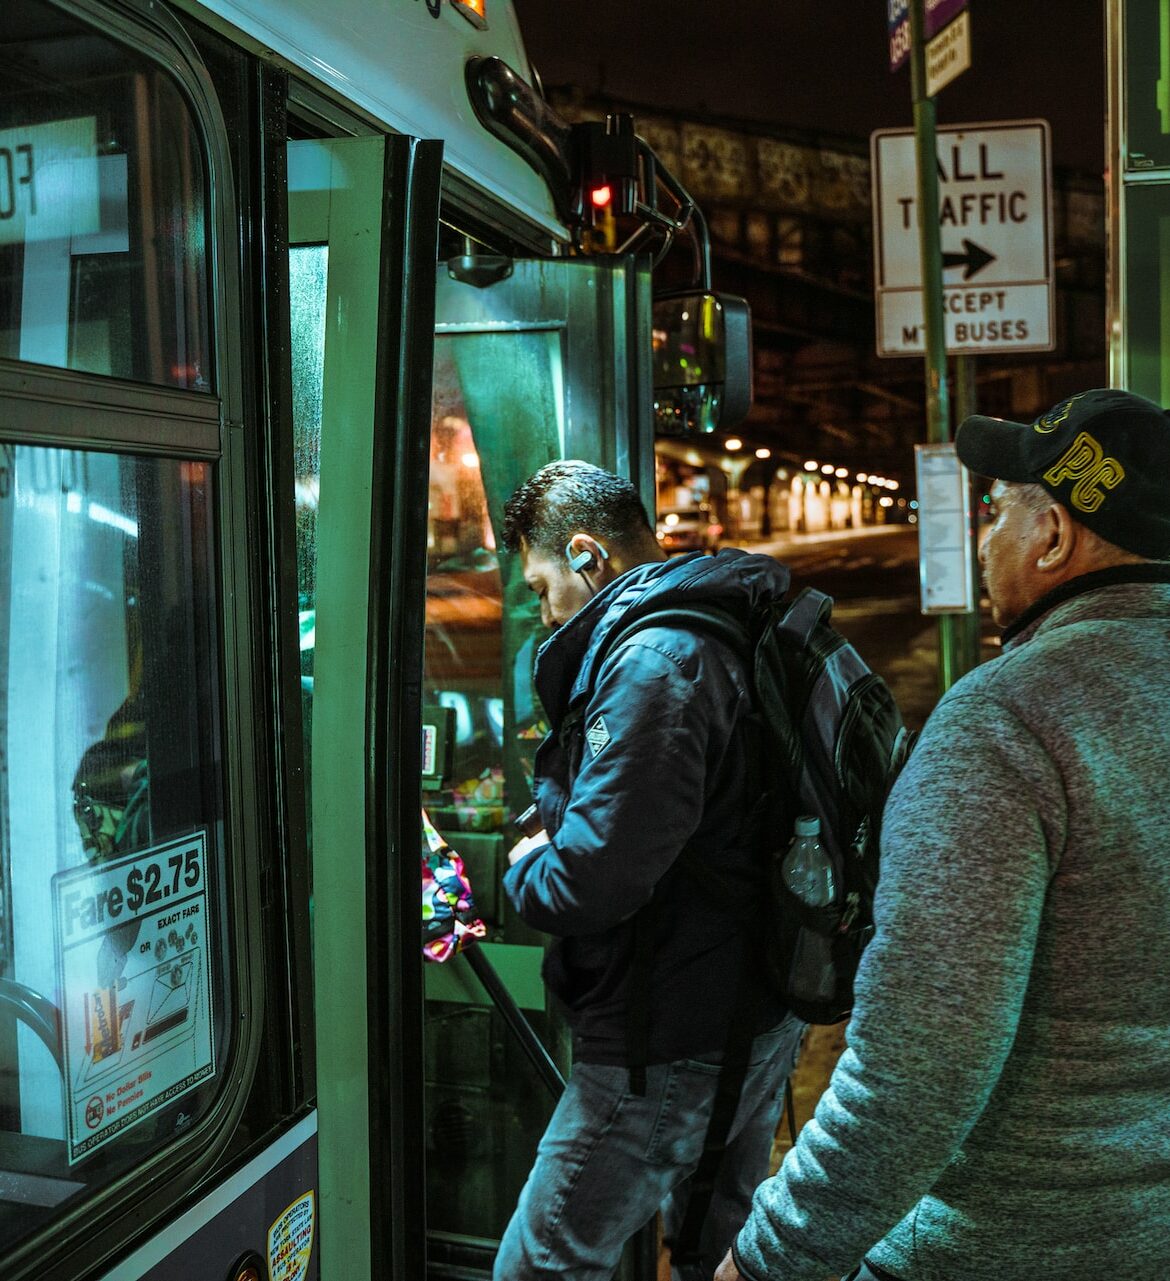 Two passengers board a night bus in Brooklyn, NY